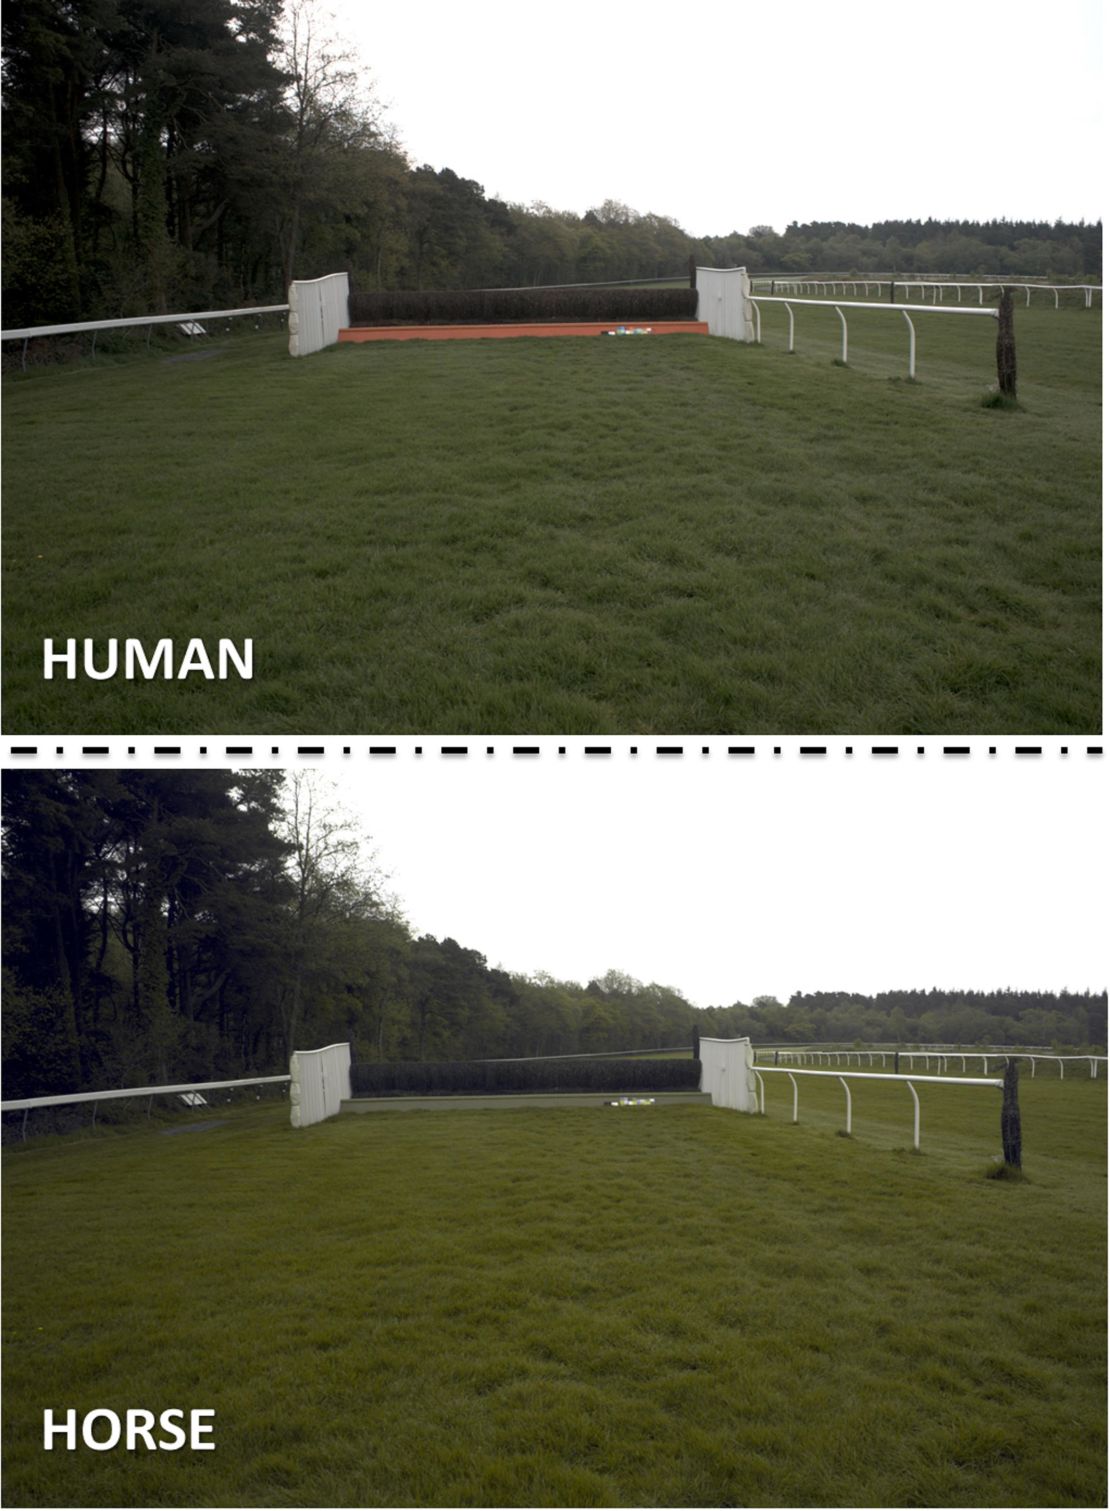 Exeter horse human vision